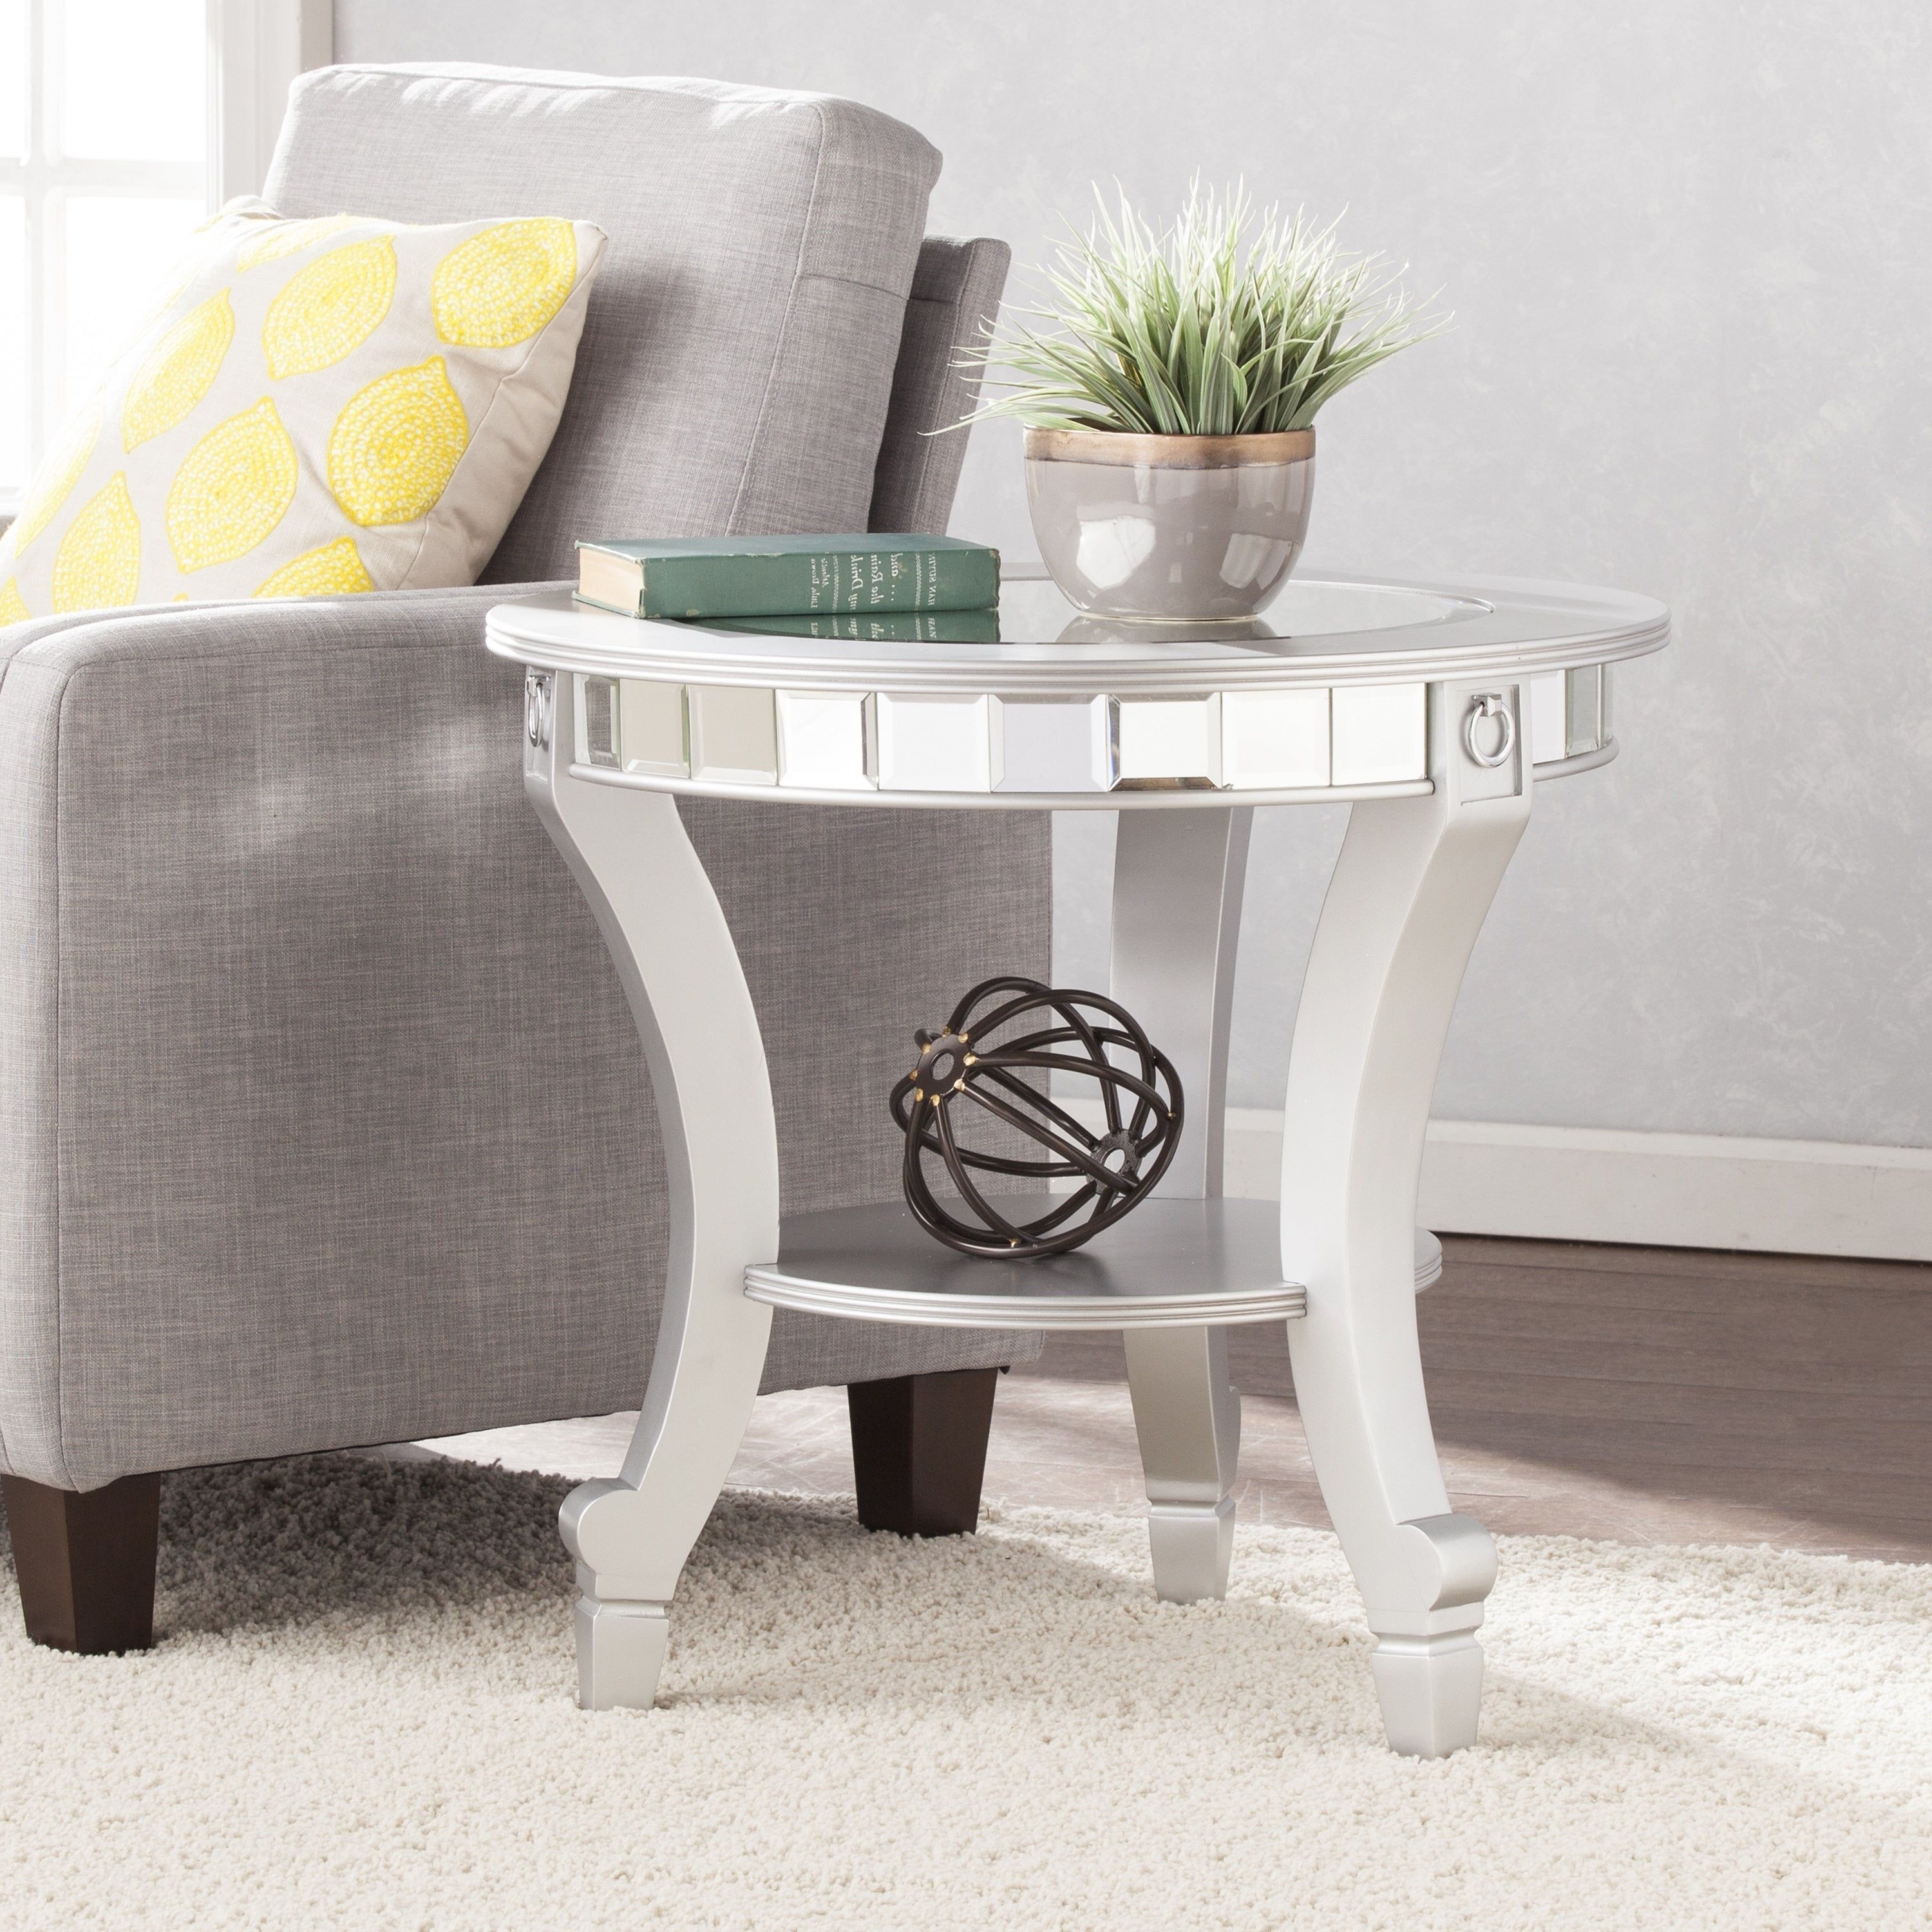 Silver Orchid Olivia Glam Mirrored Round End Table – Matte Silver Intended For Best And Newest Silver Orchid Olivia Glam Mirrored Round Cocktail Tables (View 3 of 20)